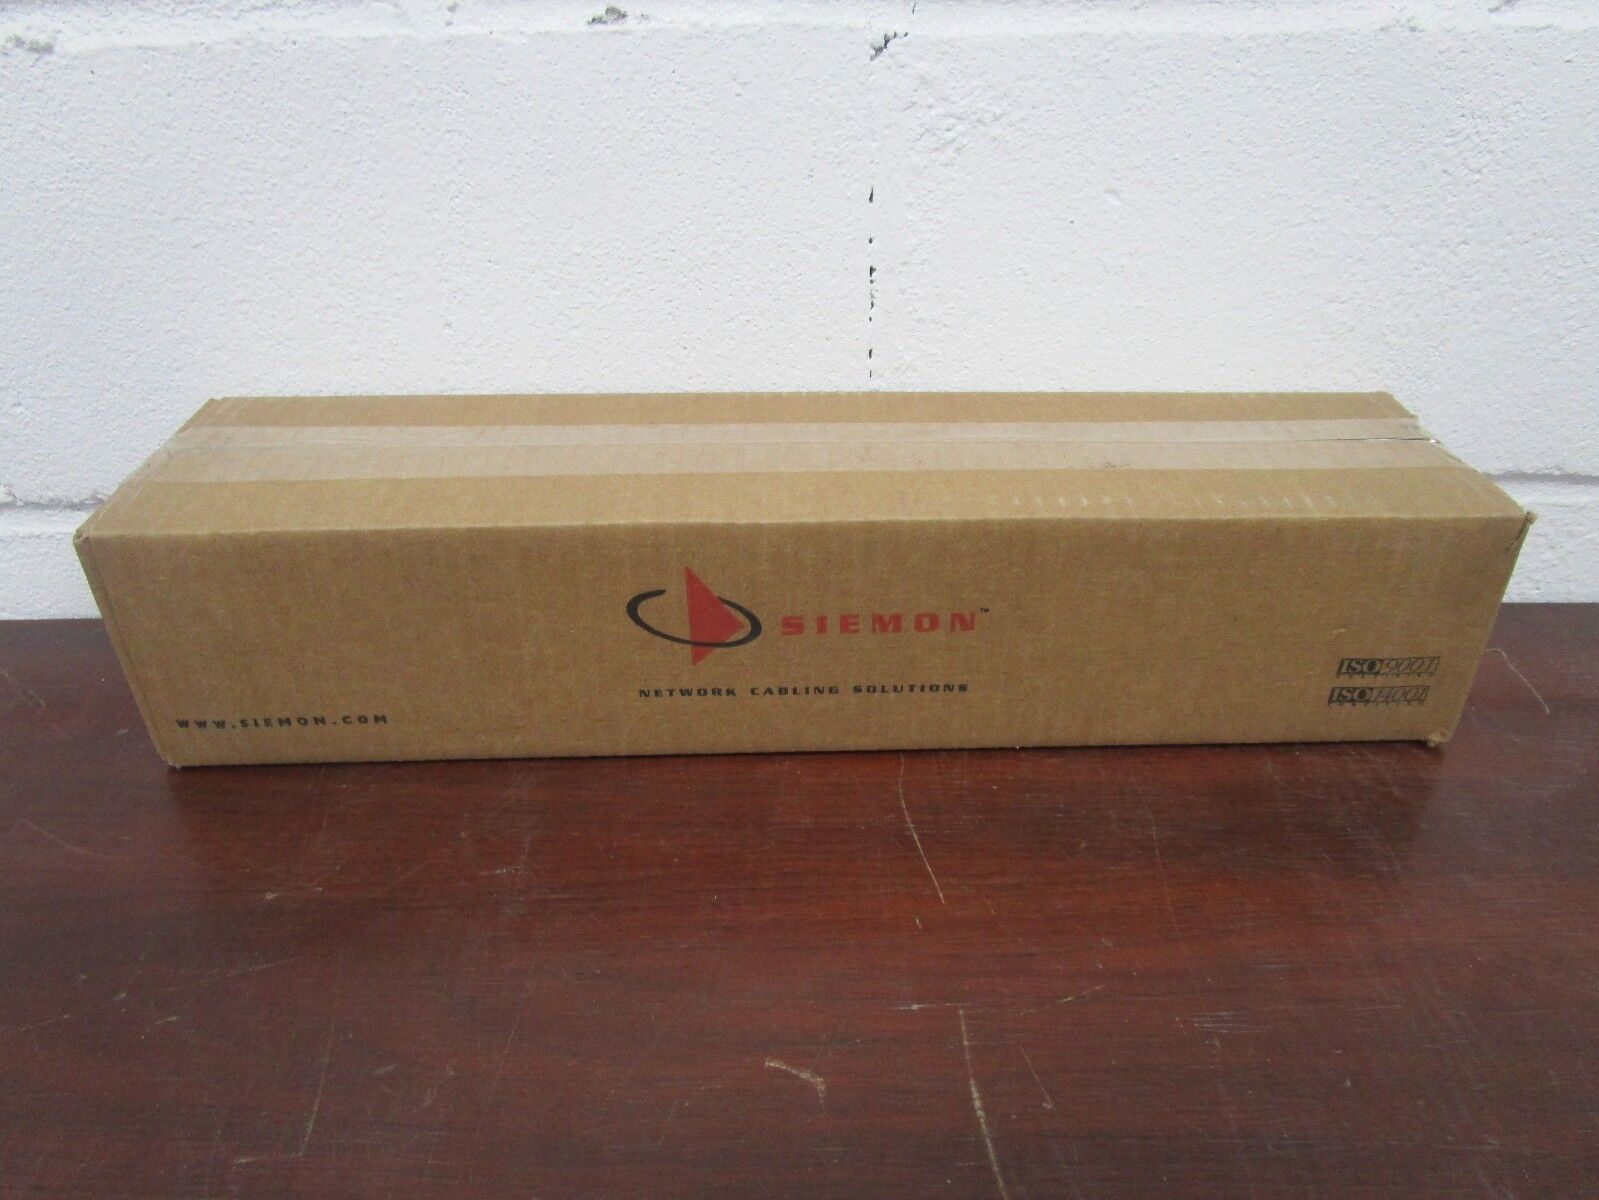 SIEMON HD5 SERIES CAT 5E 24 Port RJ-45 RACK MOUNT PATCH PANEL NEW SEE PHOTOS